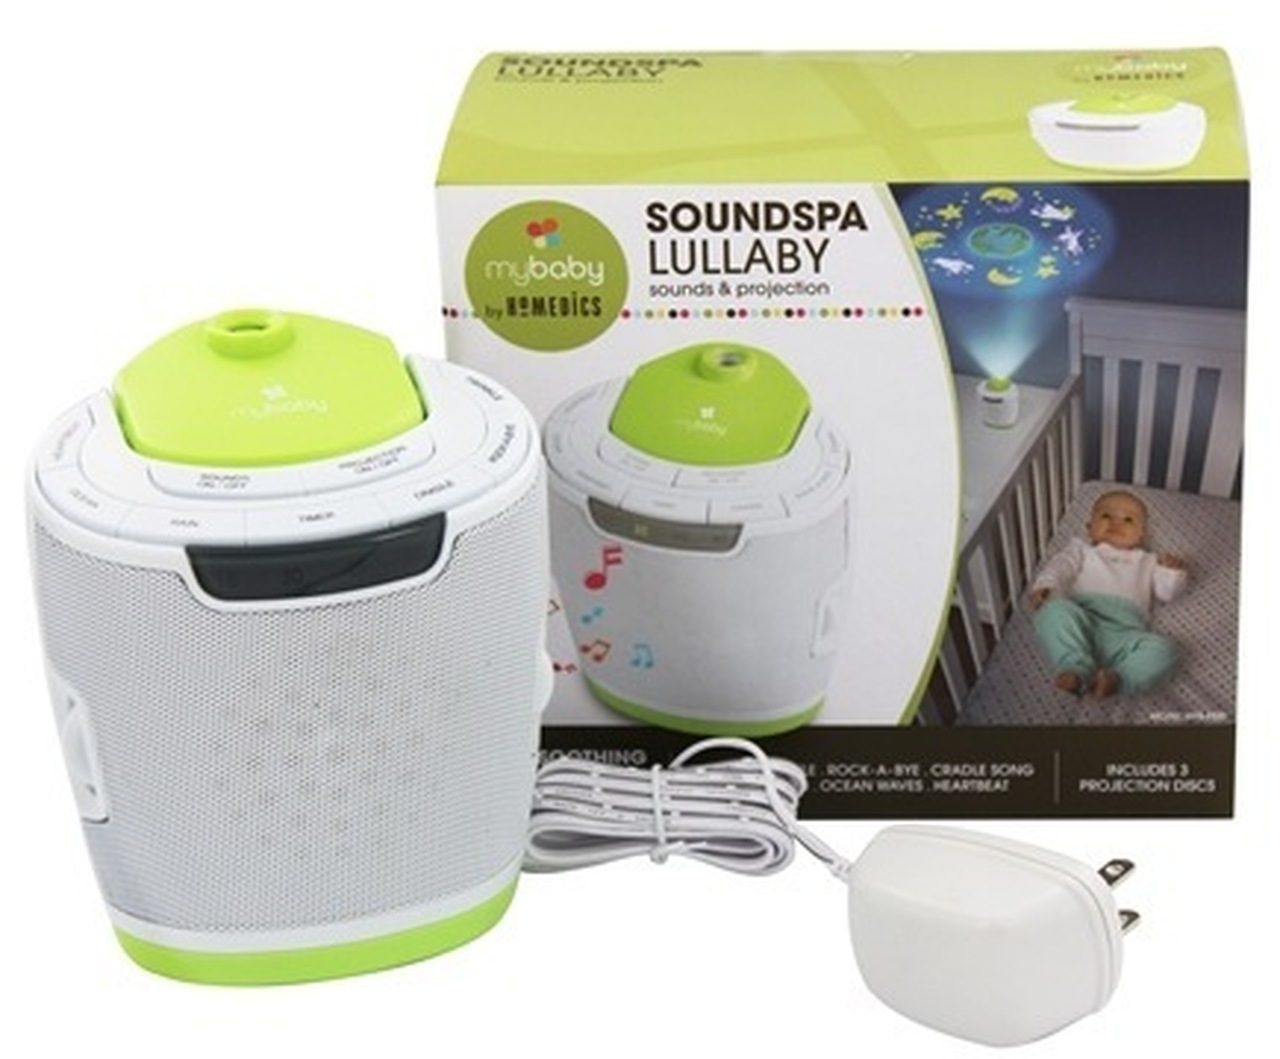 myBaby Soundspa Lullaby Sound Machine and Projector